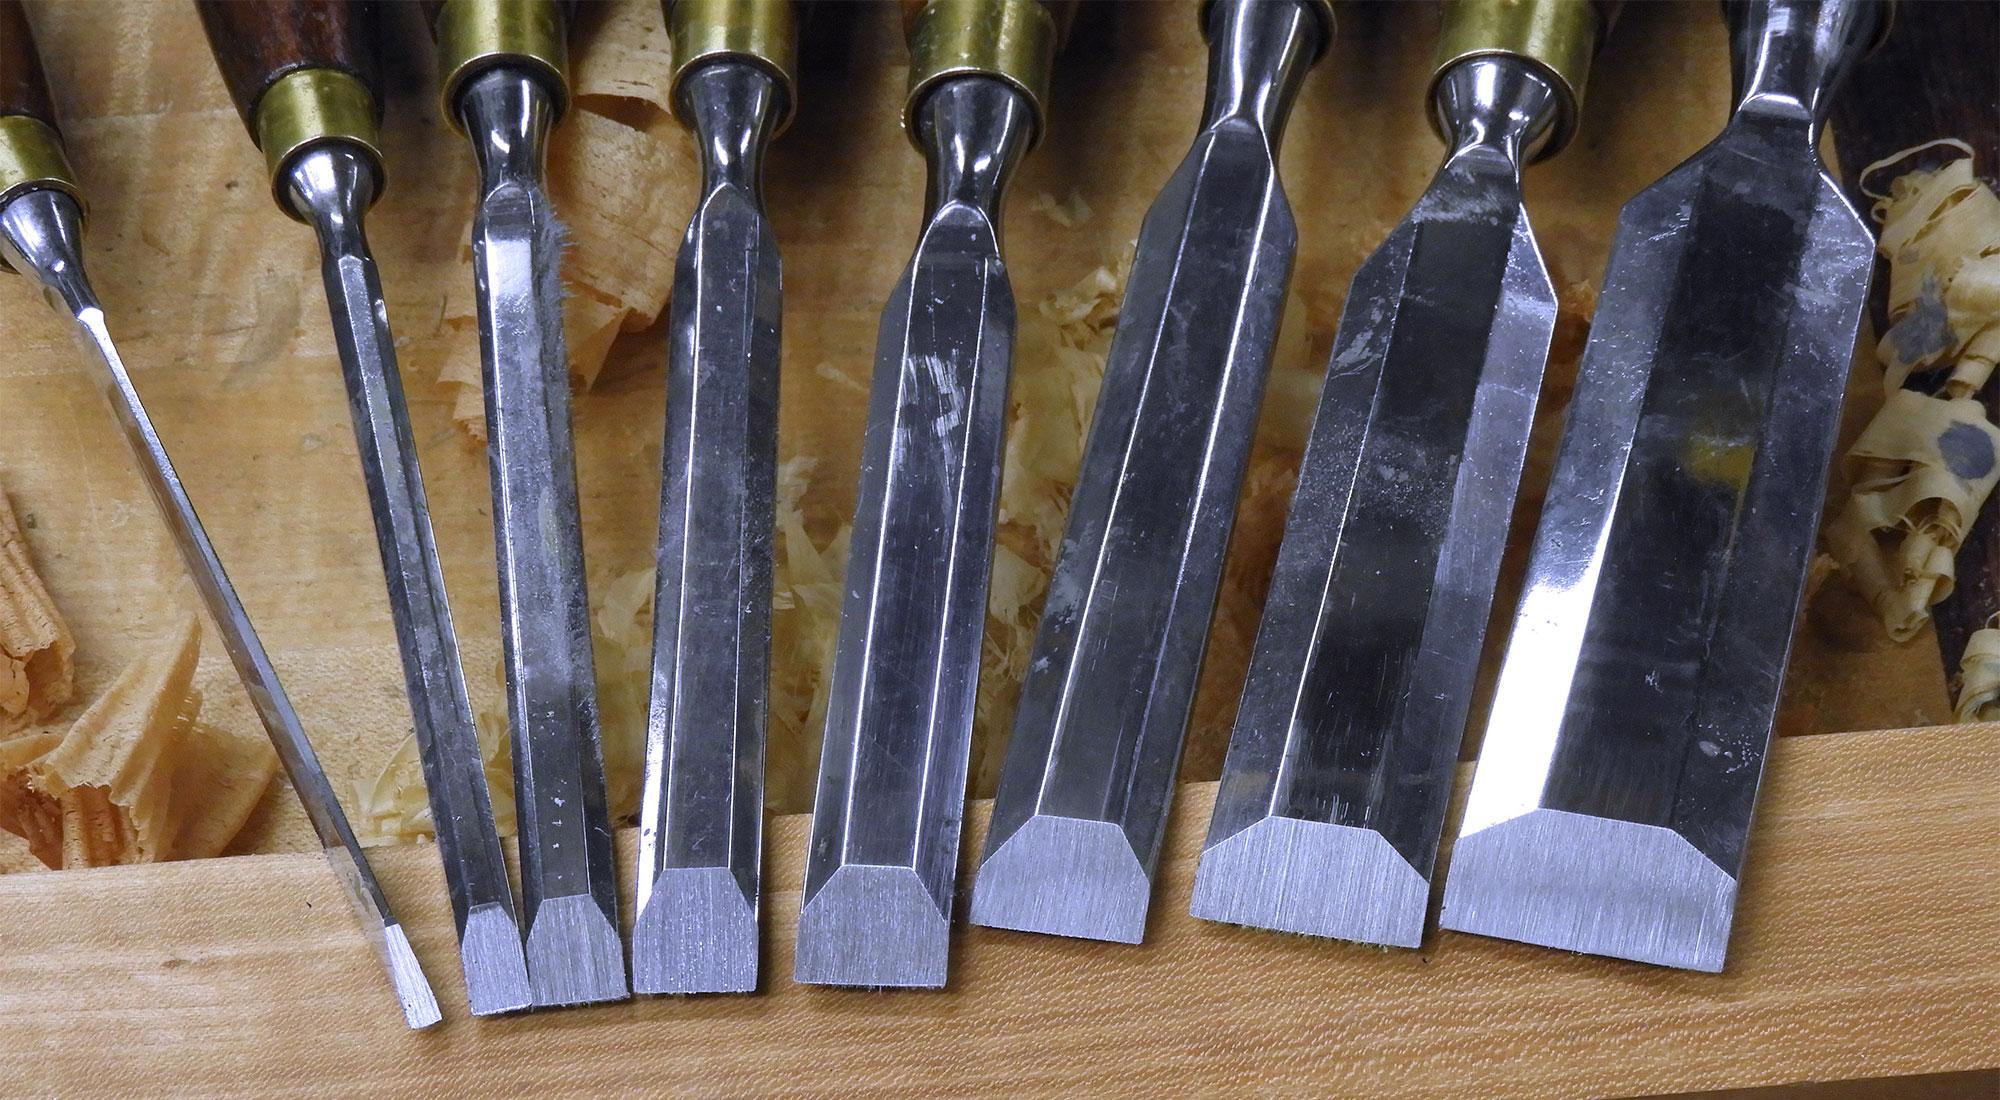 Chisels ready for final lapping and honing.